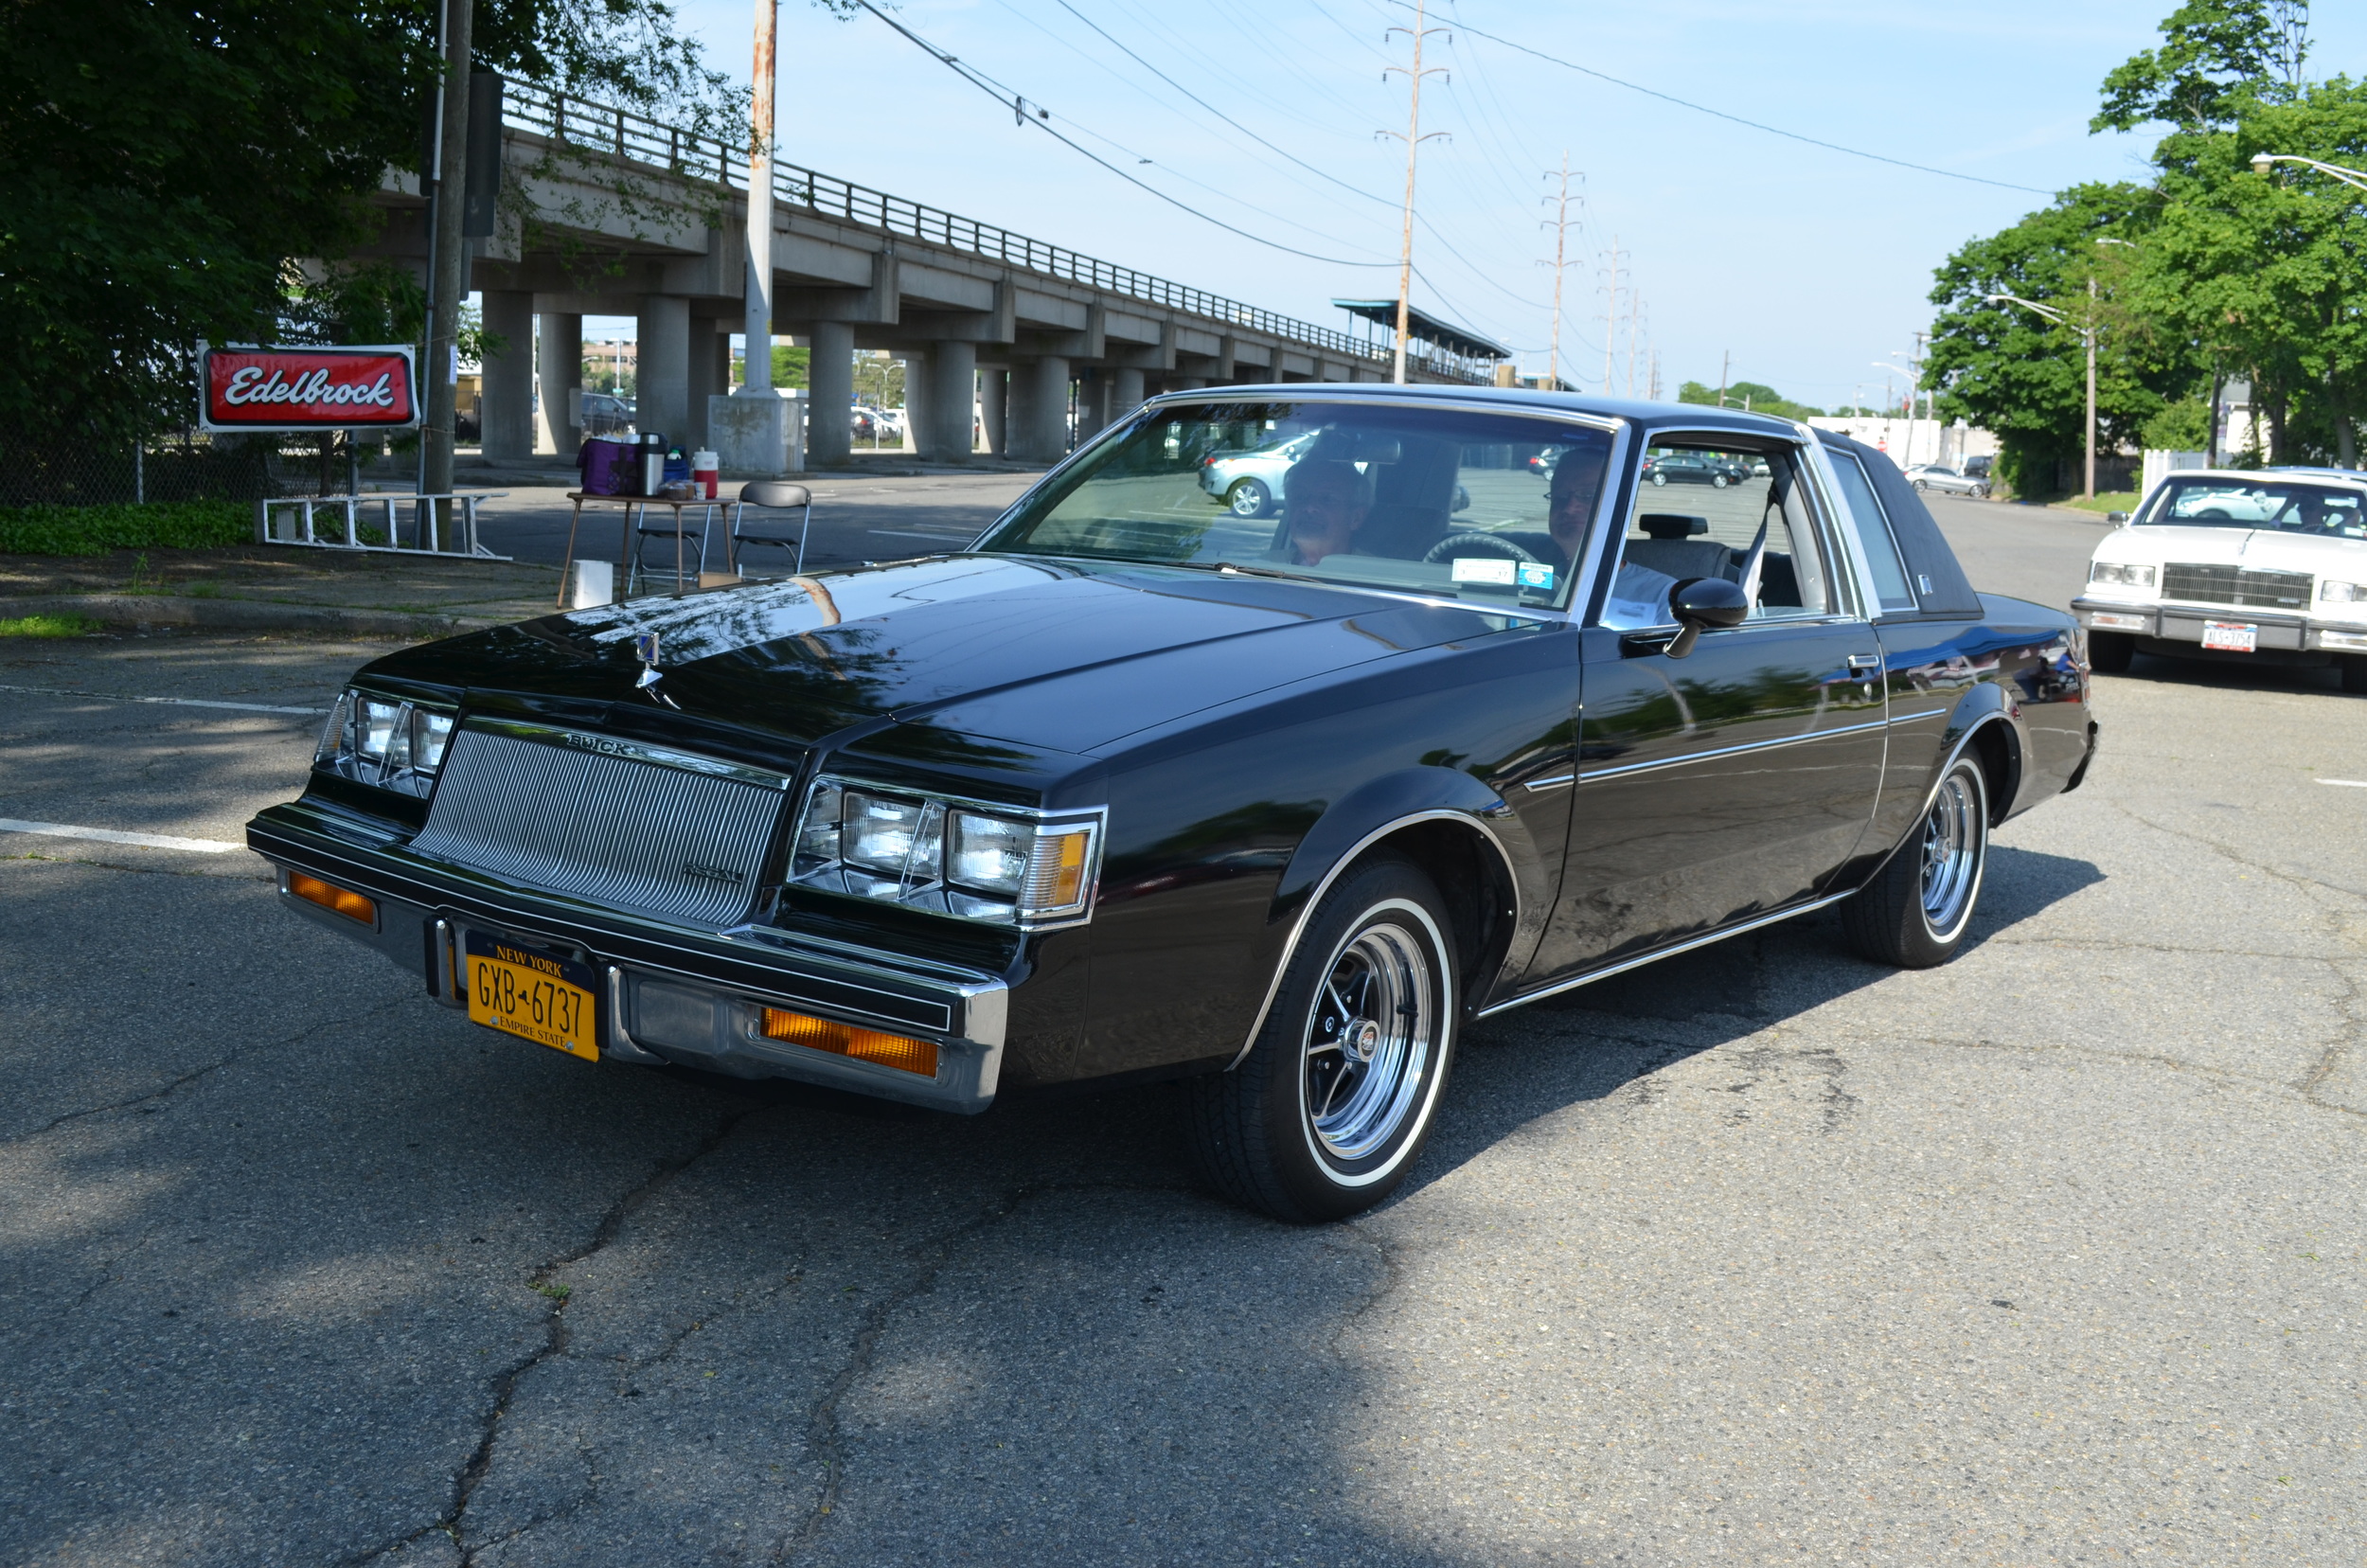 Andy Kollos: 1986 Regal 2 Dr. Coupe